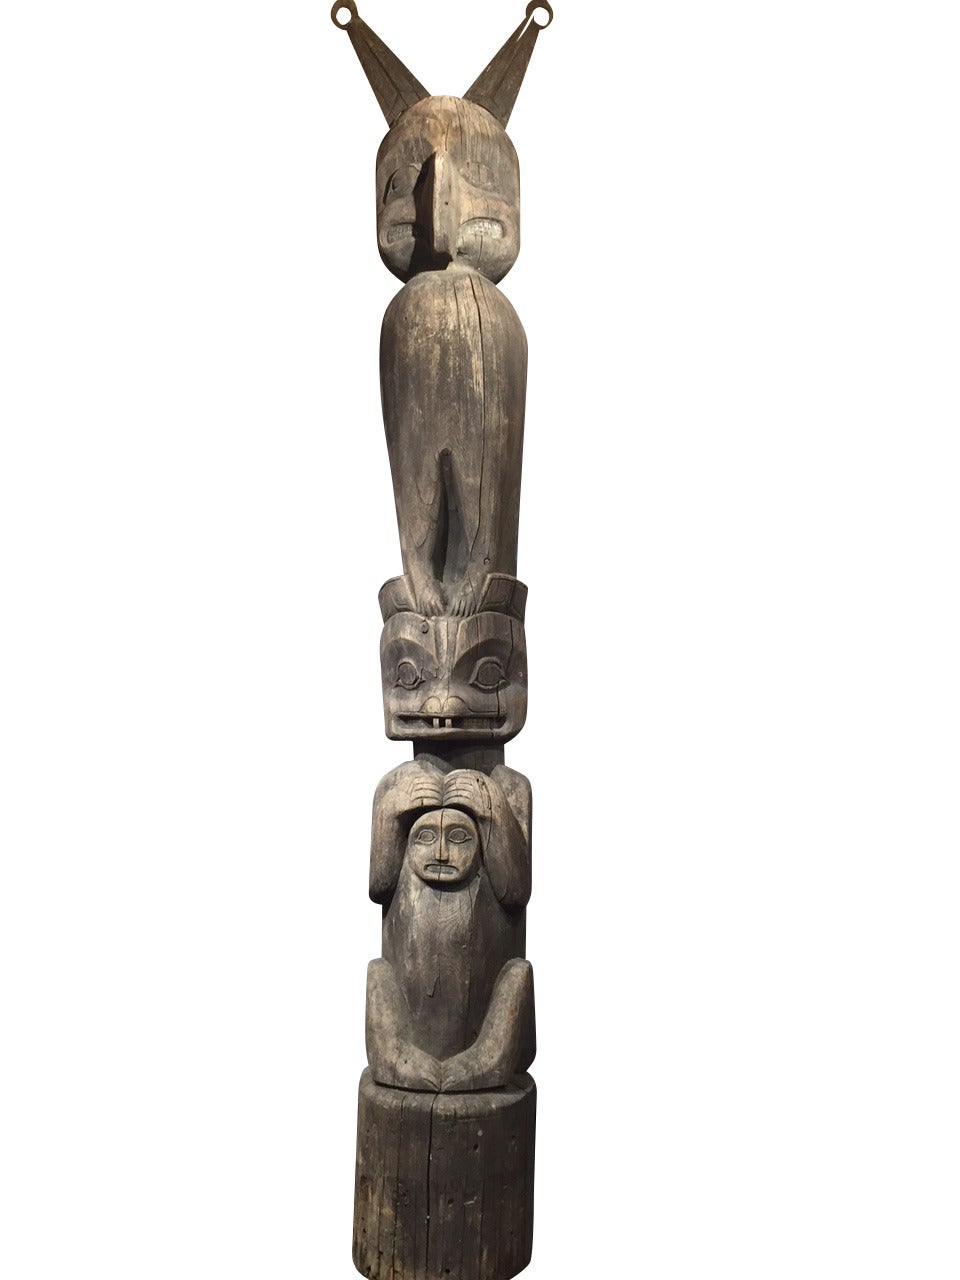 19th Century Kwakiutl Clan Totem Pole from Alert Bay, Alaska circa 1870. This famous Totem Pole is pictured in many historic photographs and postcards in front of the Nugget Shop in Juneau, Alaska with a fresh paint job circa 1915. Weathering has